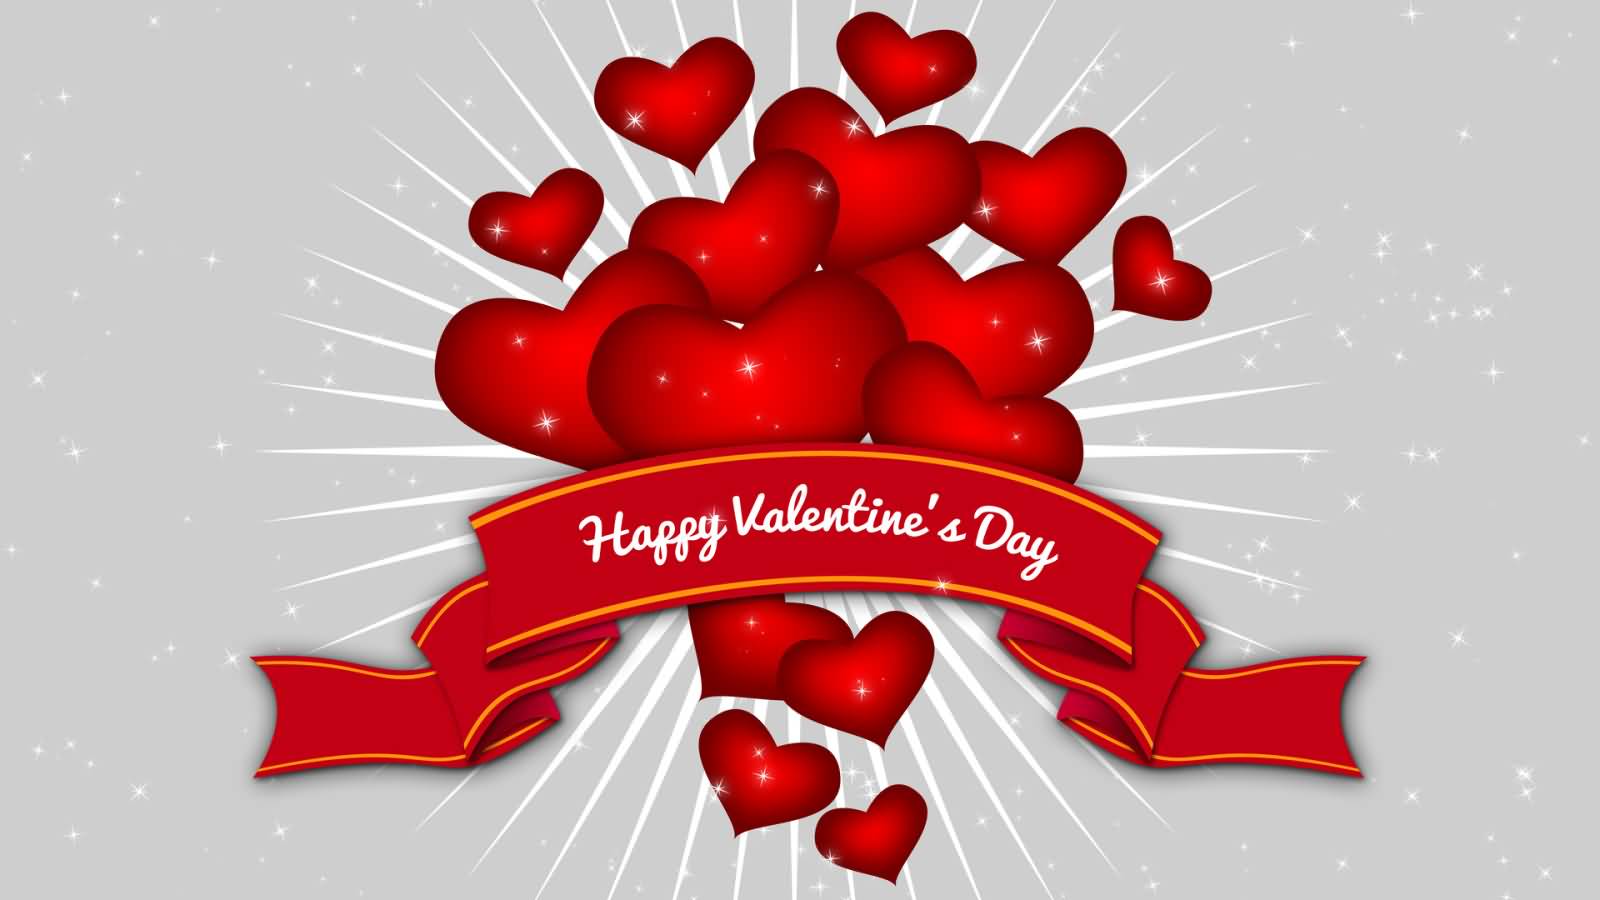 55+ Most Beautiful Valentine Day Wallpapers1600 x 900